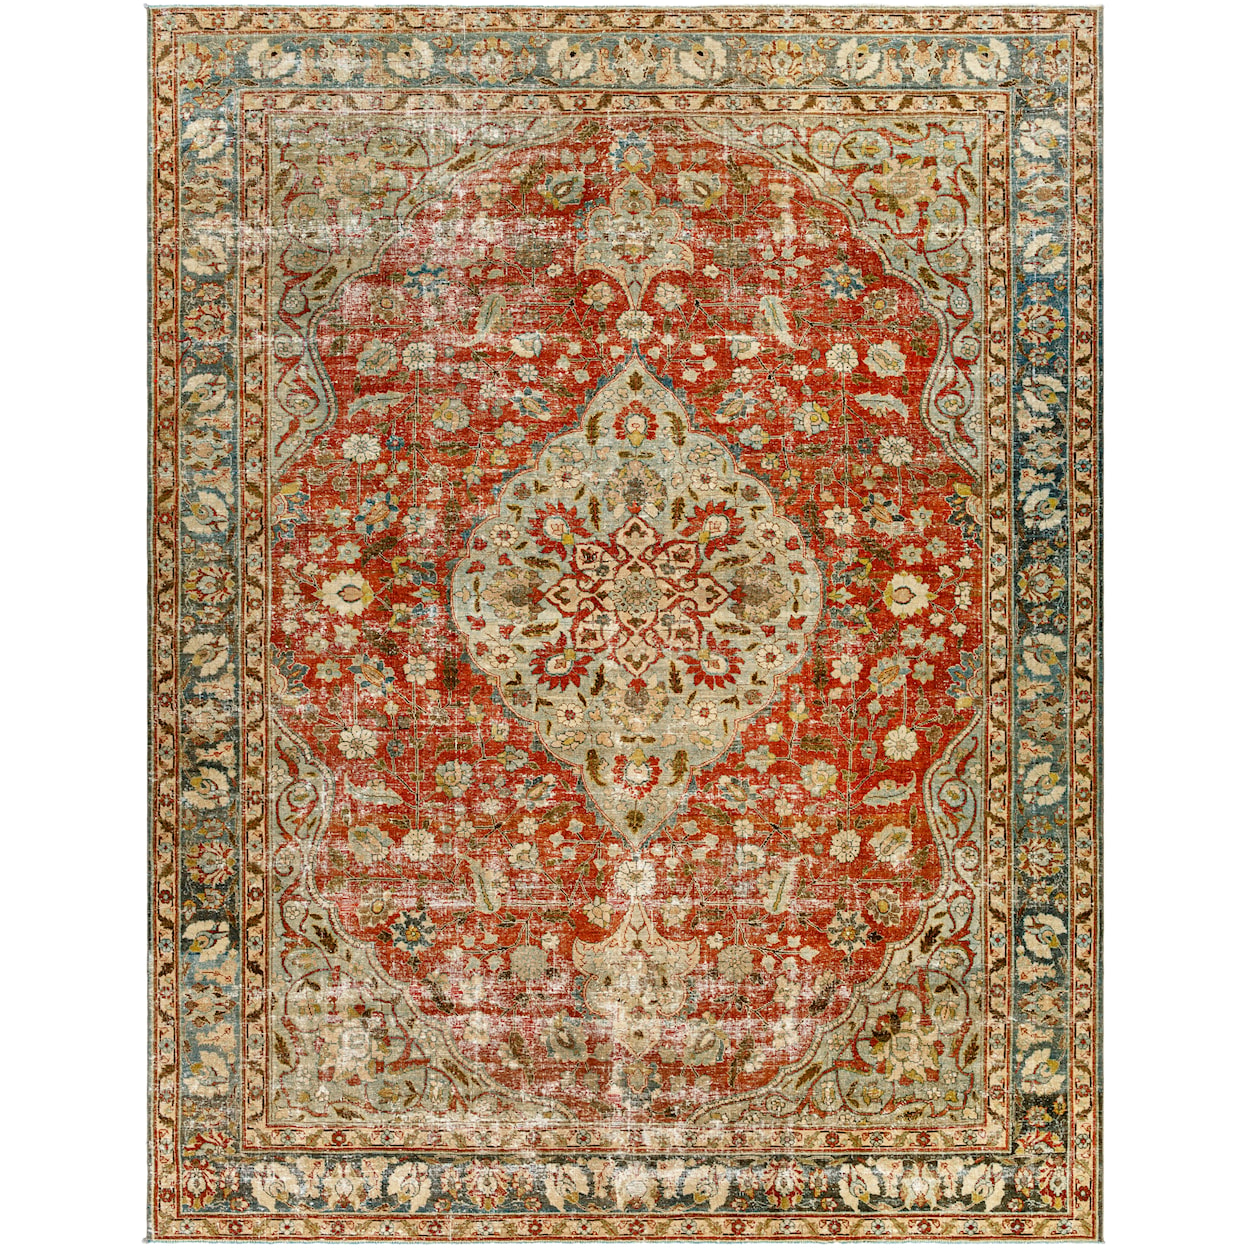 Surya Rugs Antique One of a Kind Rugs